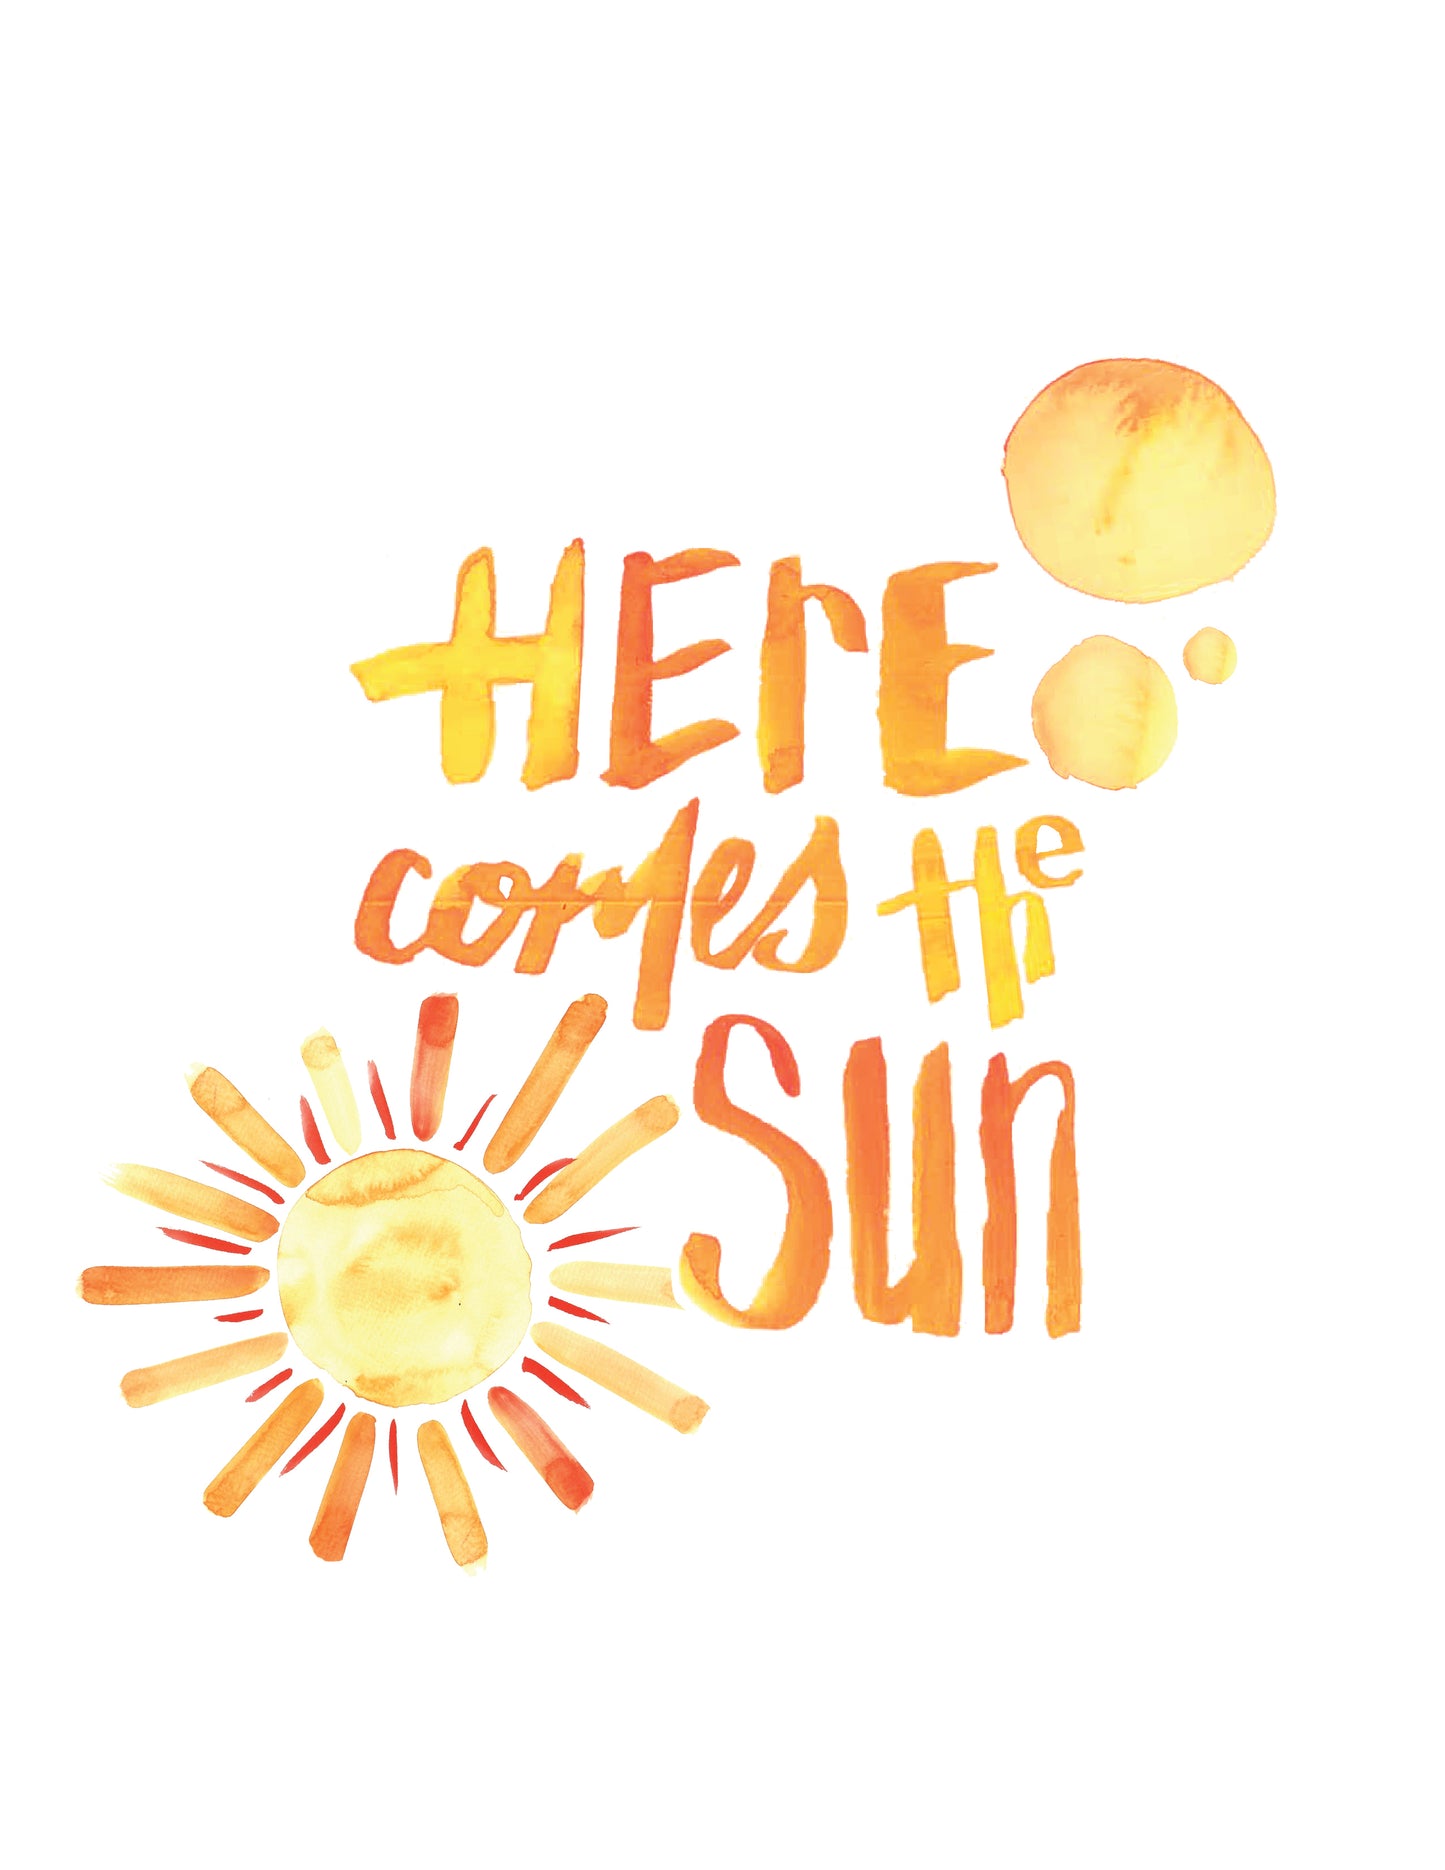 "Here Comes The Sun" Print